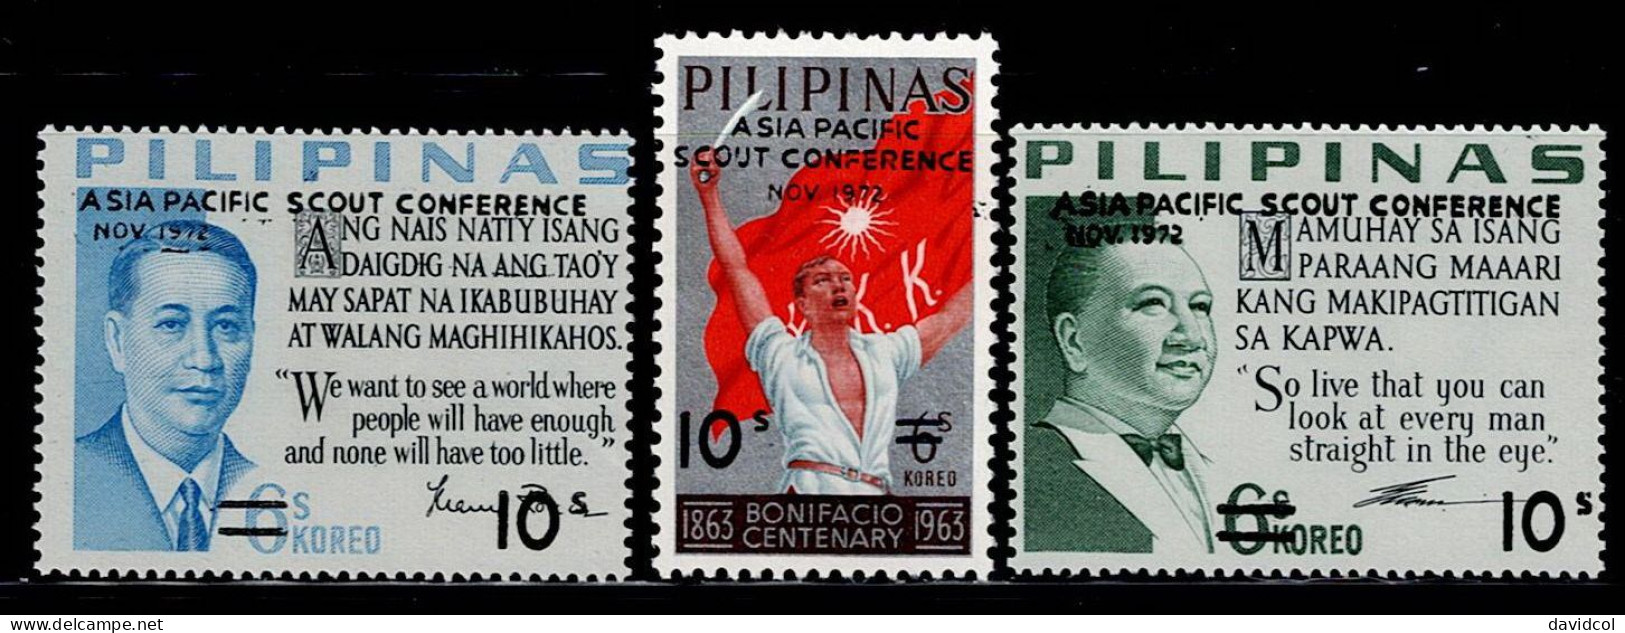 FIL-18- PHILIPPINES - 1972 - MNH -SCOUTS- ASIA-PACIFIC SCOUT CONFERENCE - Philippinen